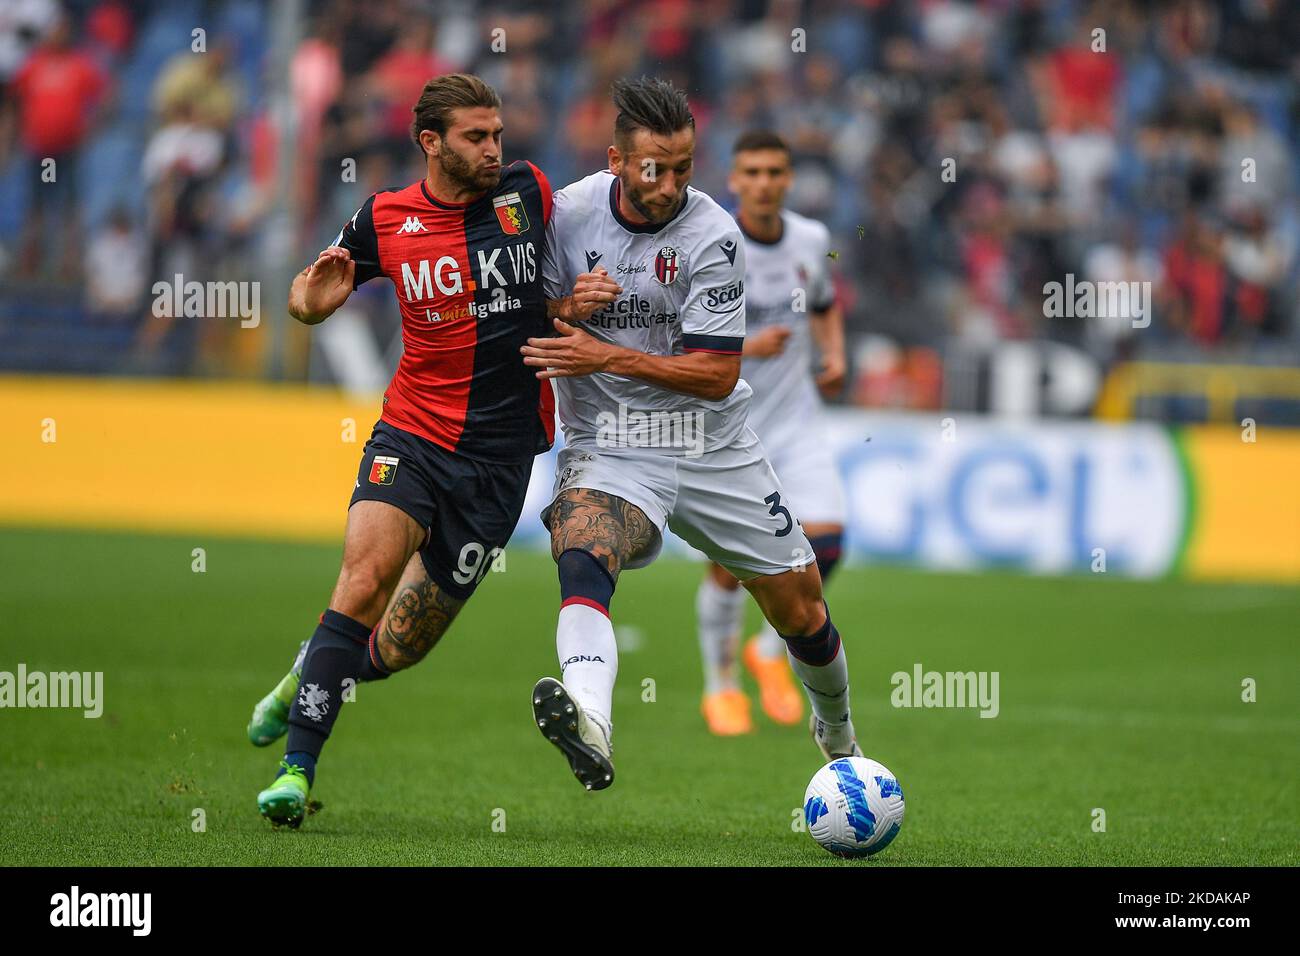 Genoa, Italy. 30 April 2022. Antonio Candreva of UC Sampdoria competes for  the ball with Pablo Galdames of Genoa CFC during the Serie A football match  between UC Sampdoria and Genoa CFC.